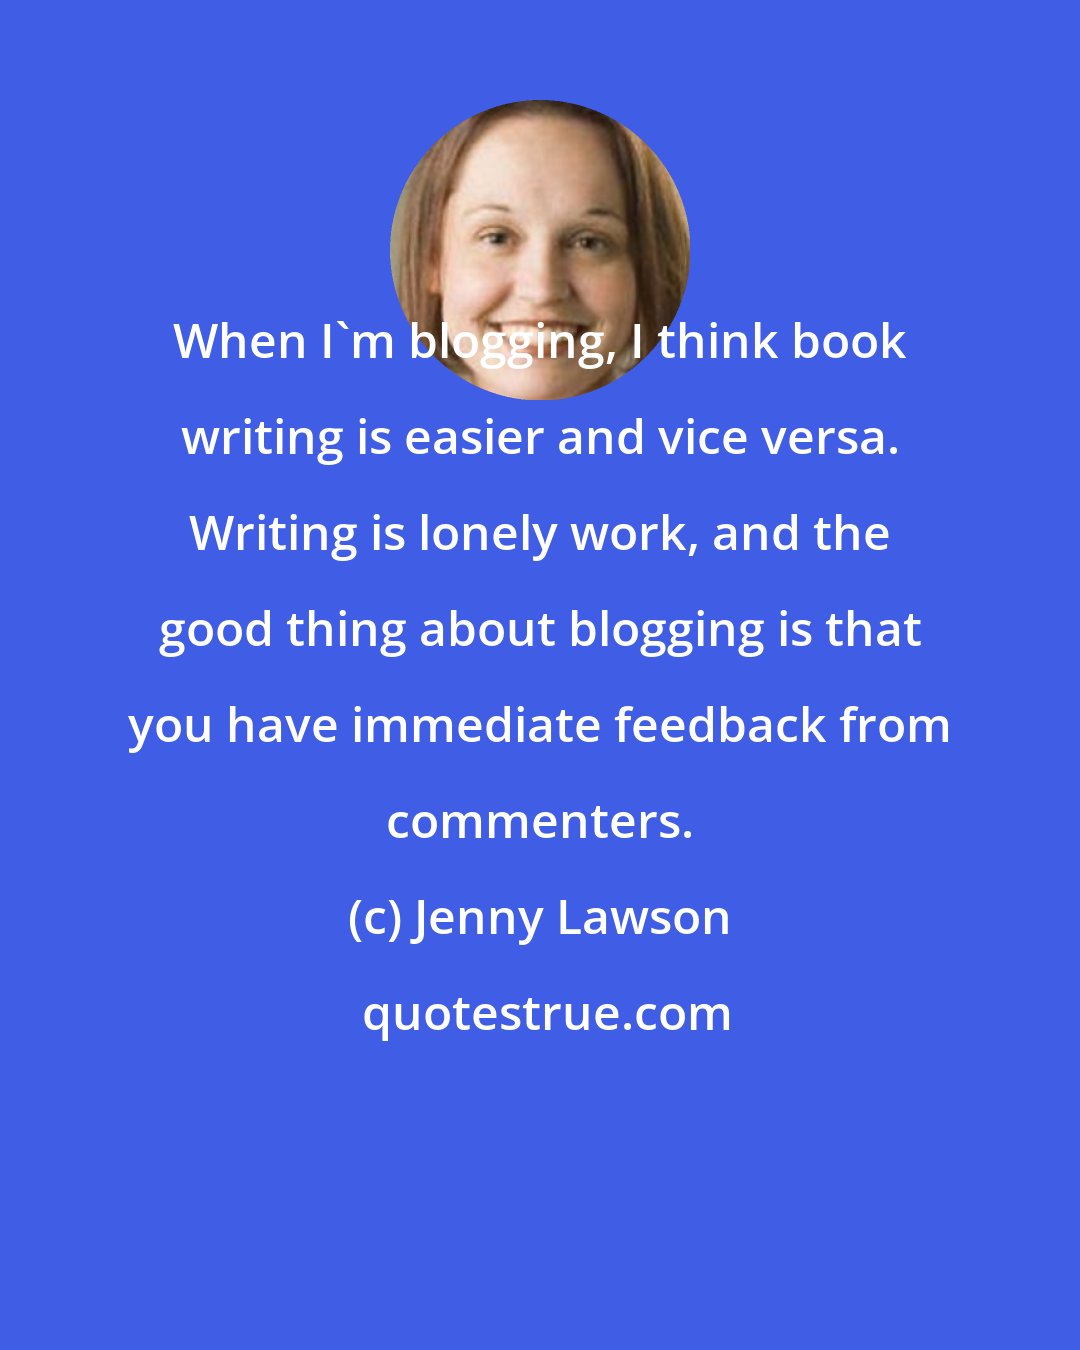 Jenny Lawson: When I'm blogging, I think book writing is easier and vice versa. Writing is lonely work, and the good thing about blogging is that you have immediate feedback from commenters.